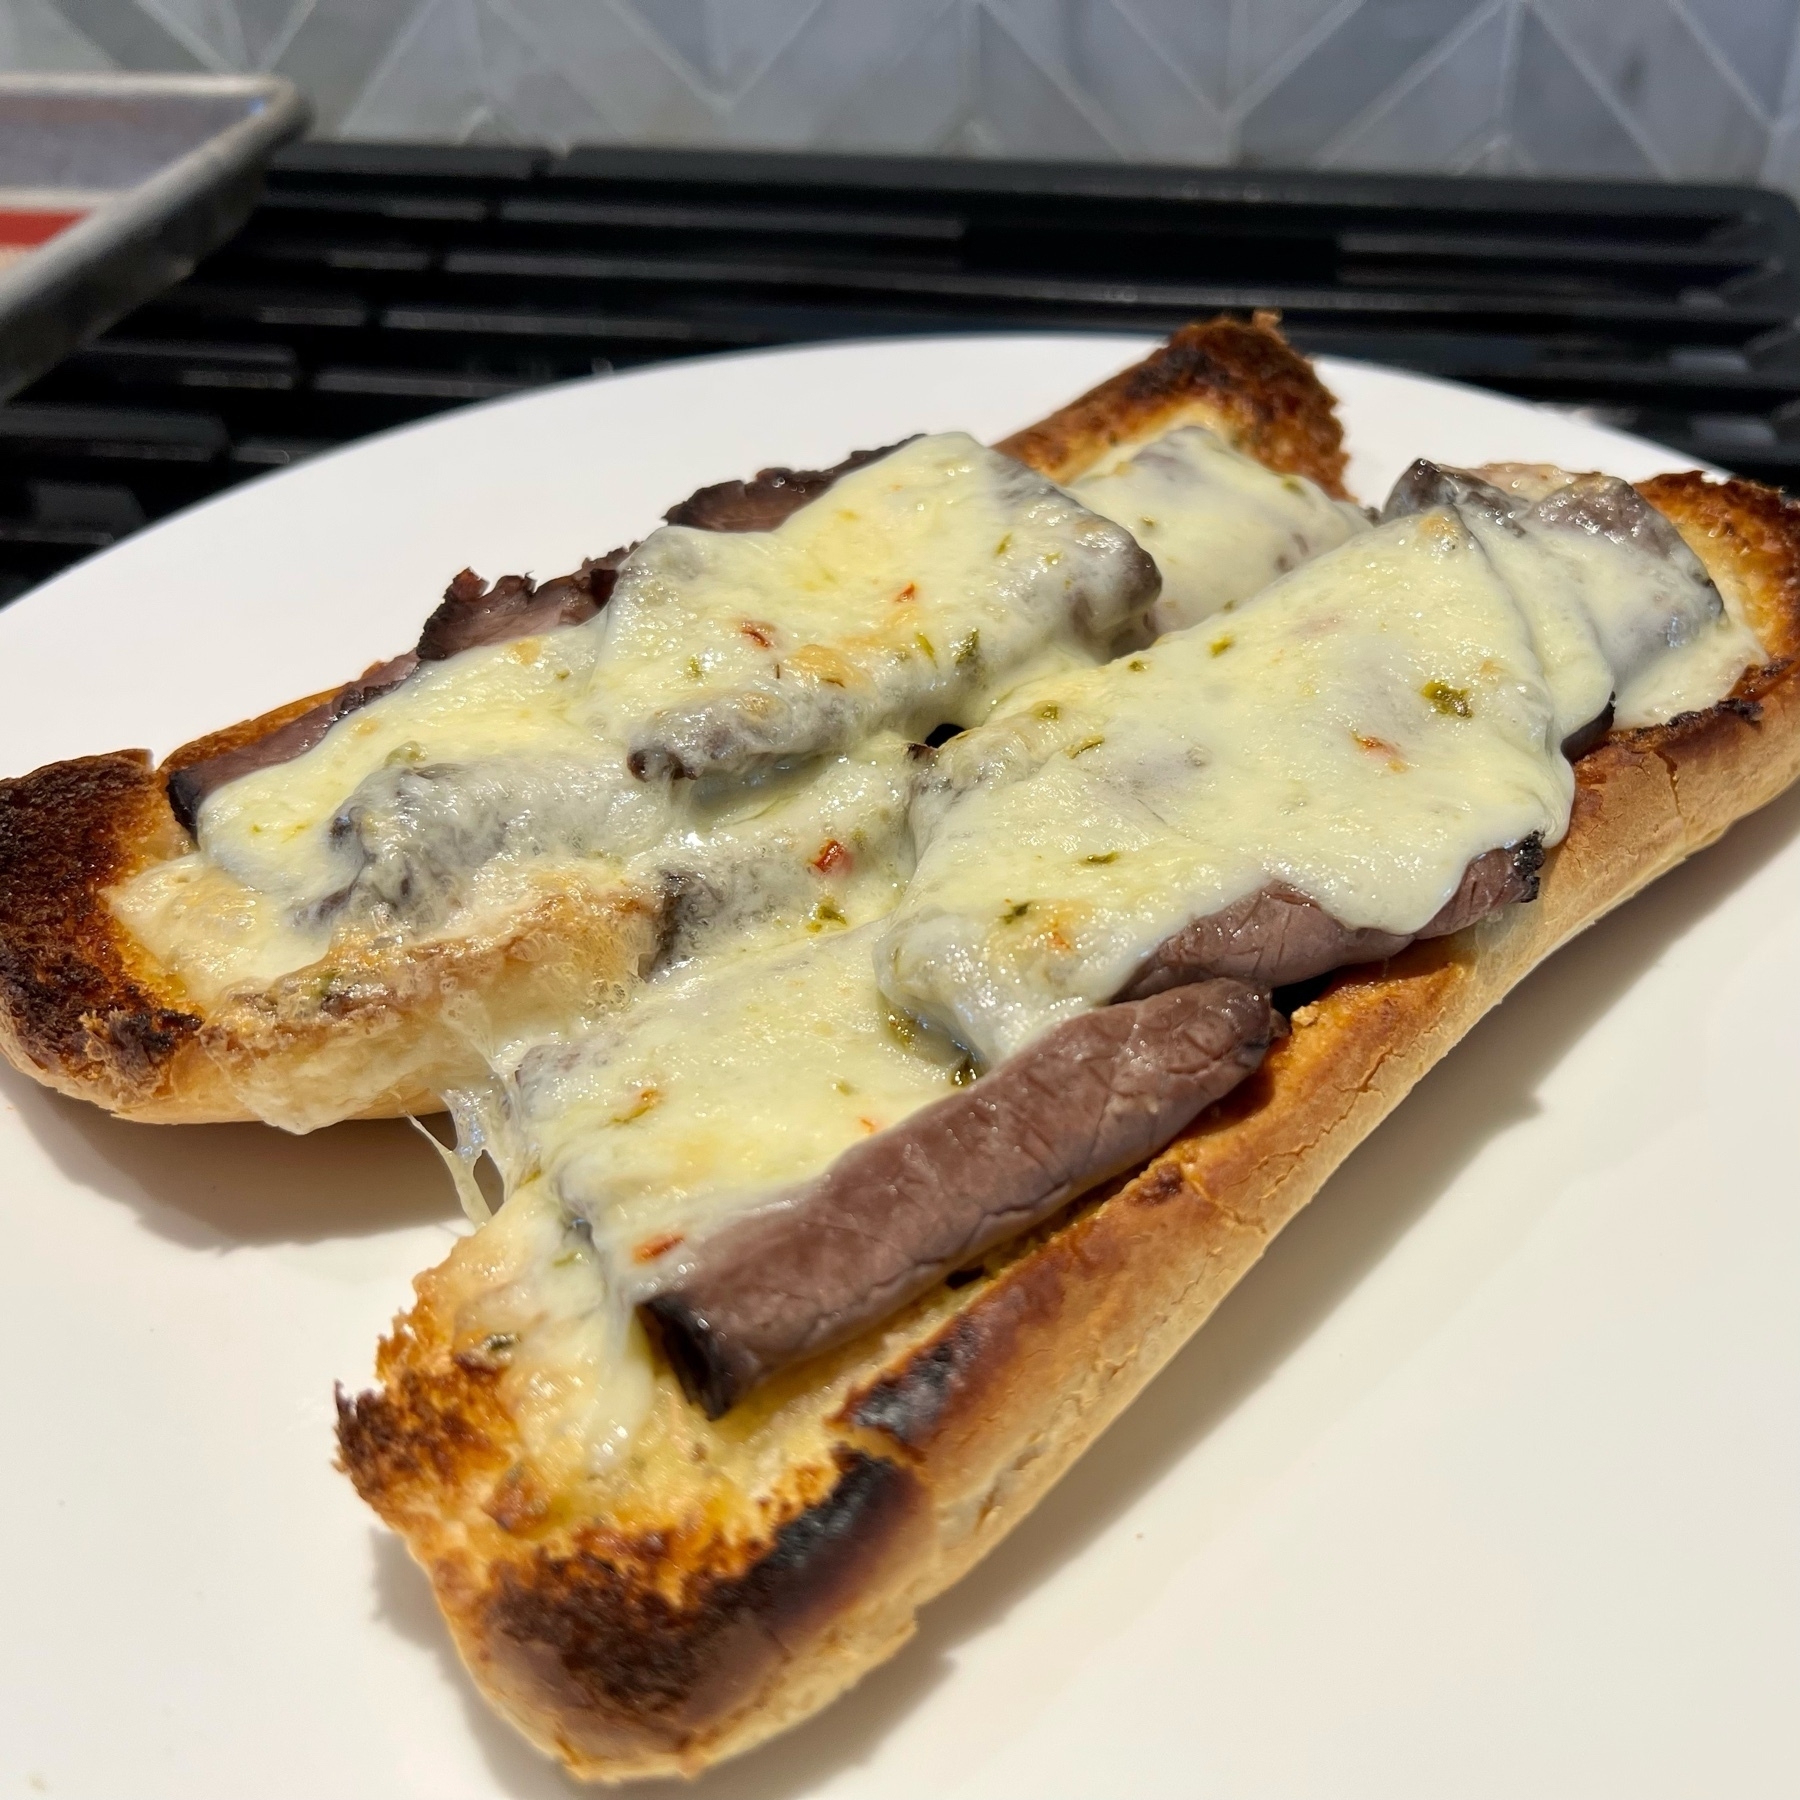 Melted cheese and roast beef on prior garlic bread.